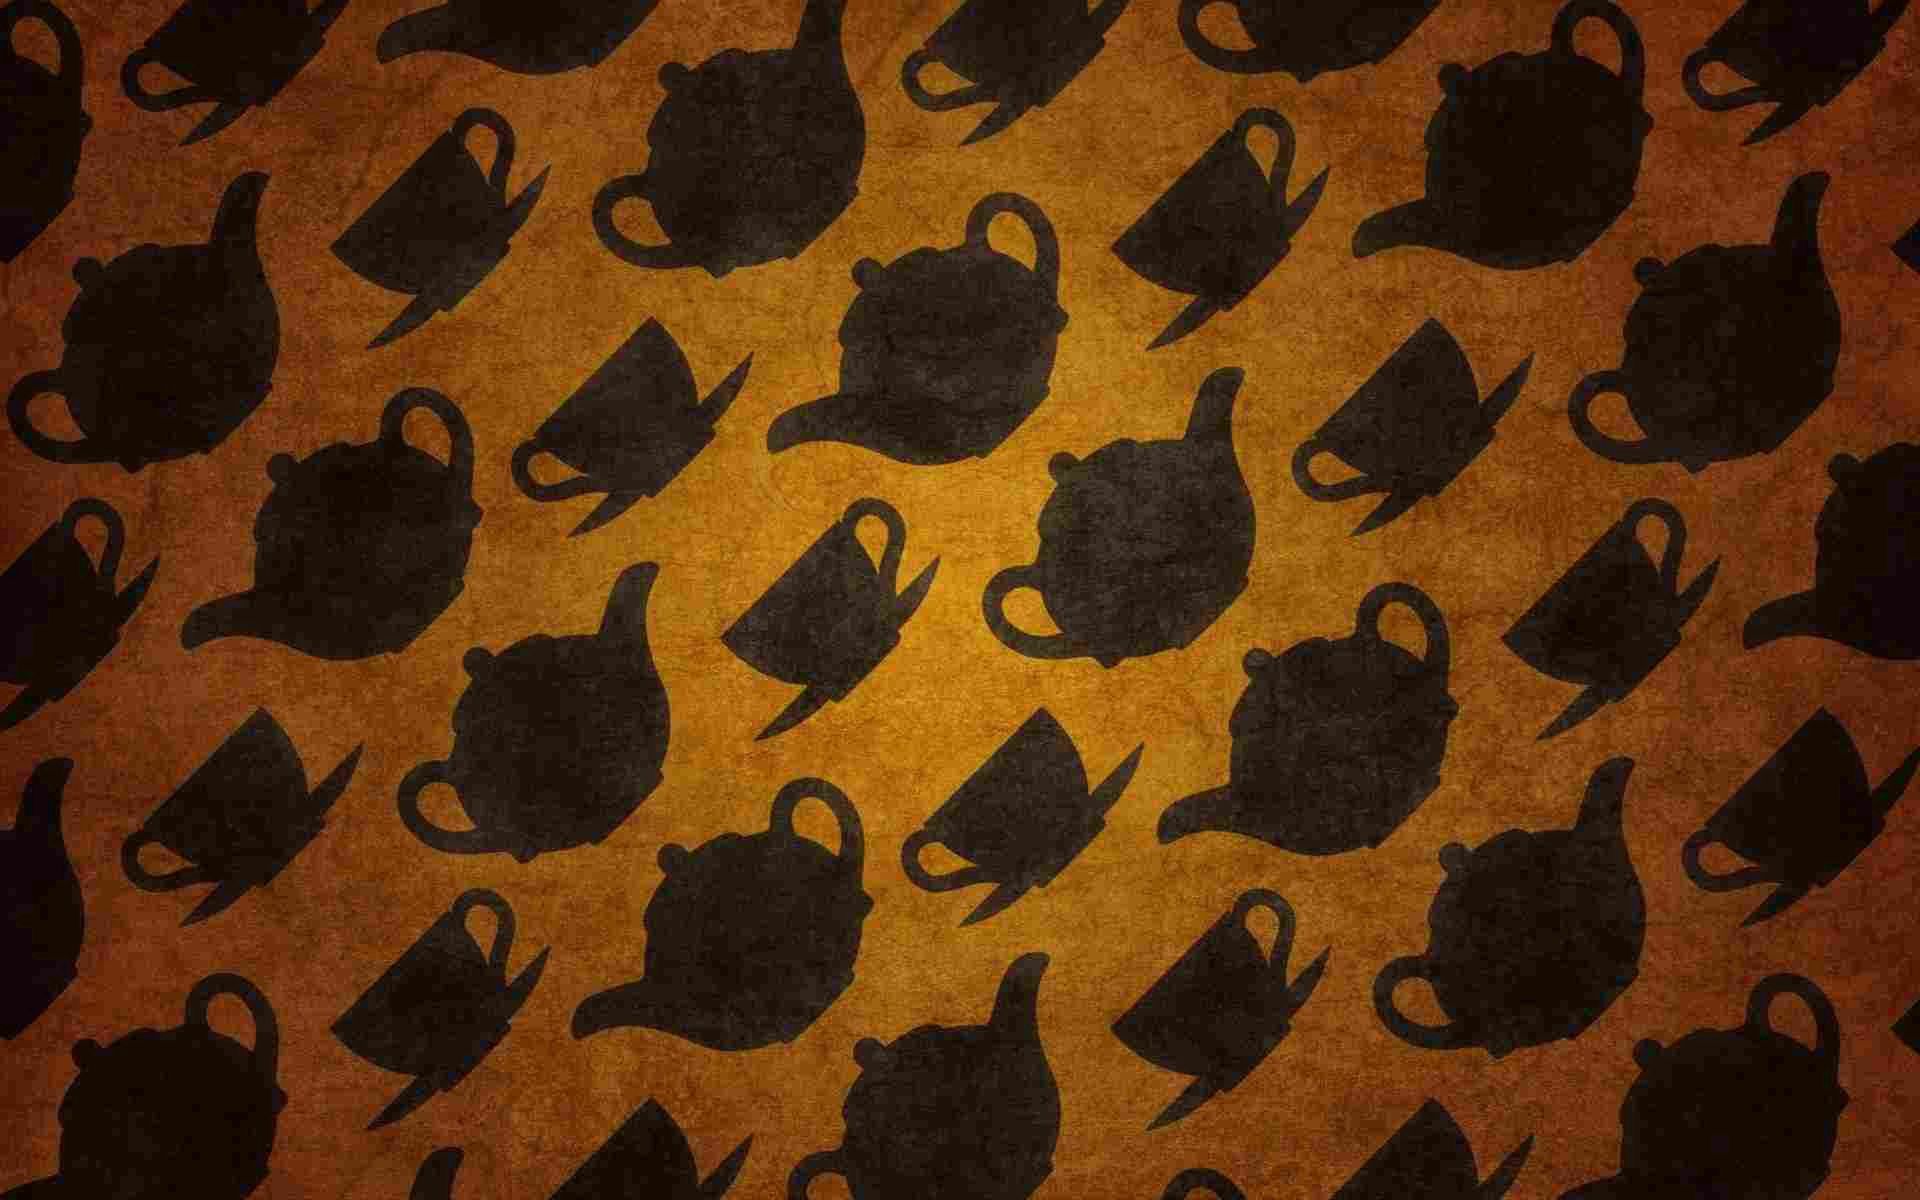 125677 download wallpaper cups, symbols, characters, texture, textures, surface, picture, drawing, kettles, teapots screensavers and pictures for free